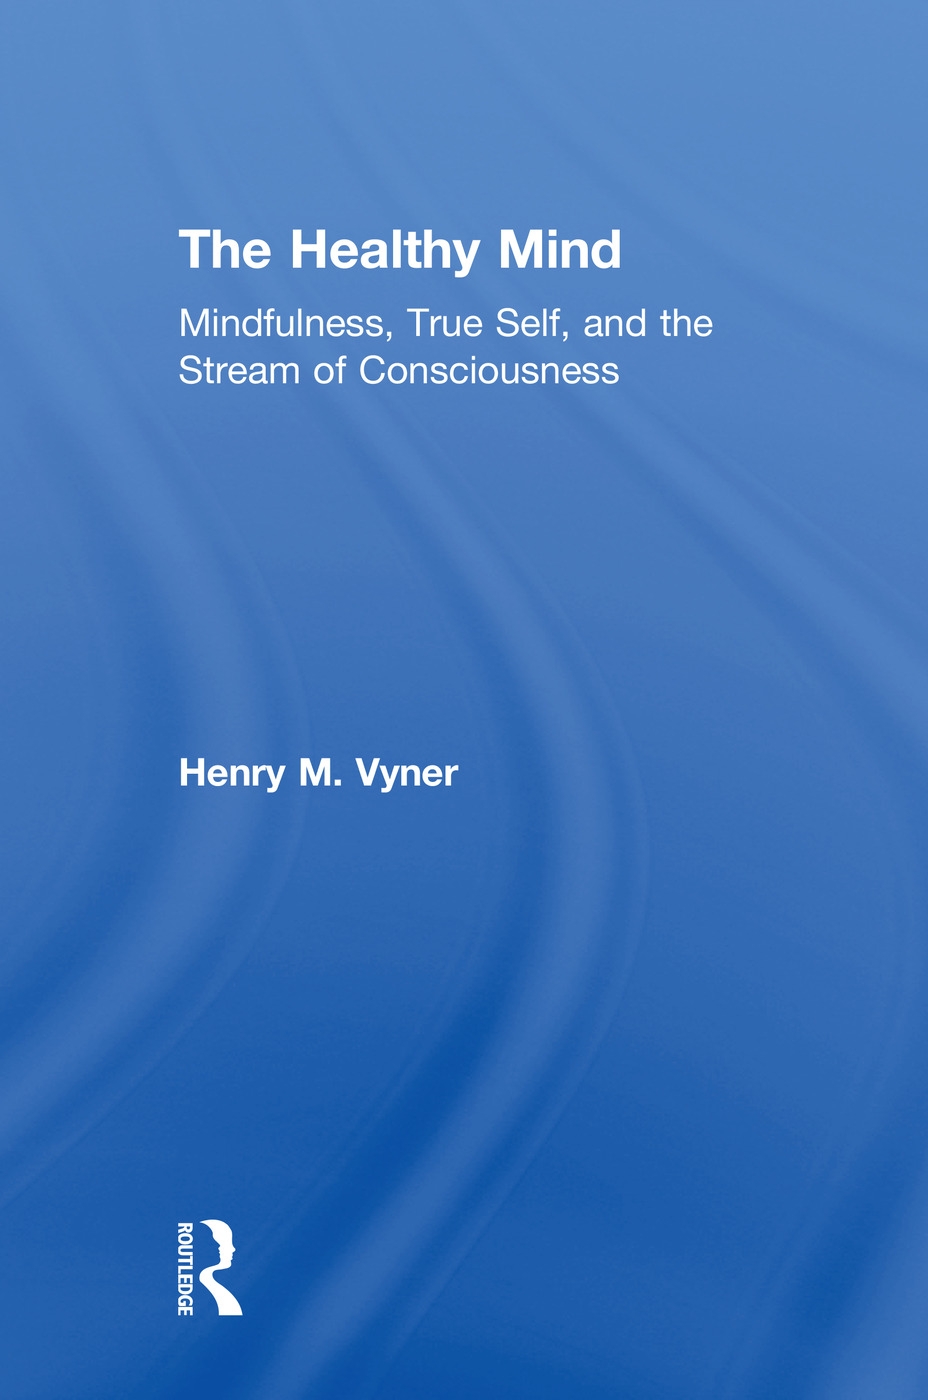 The Healthy Mind: Mindfulness, True Self, and the Stream of Consciousness